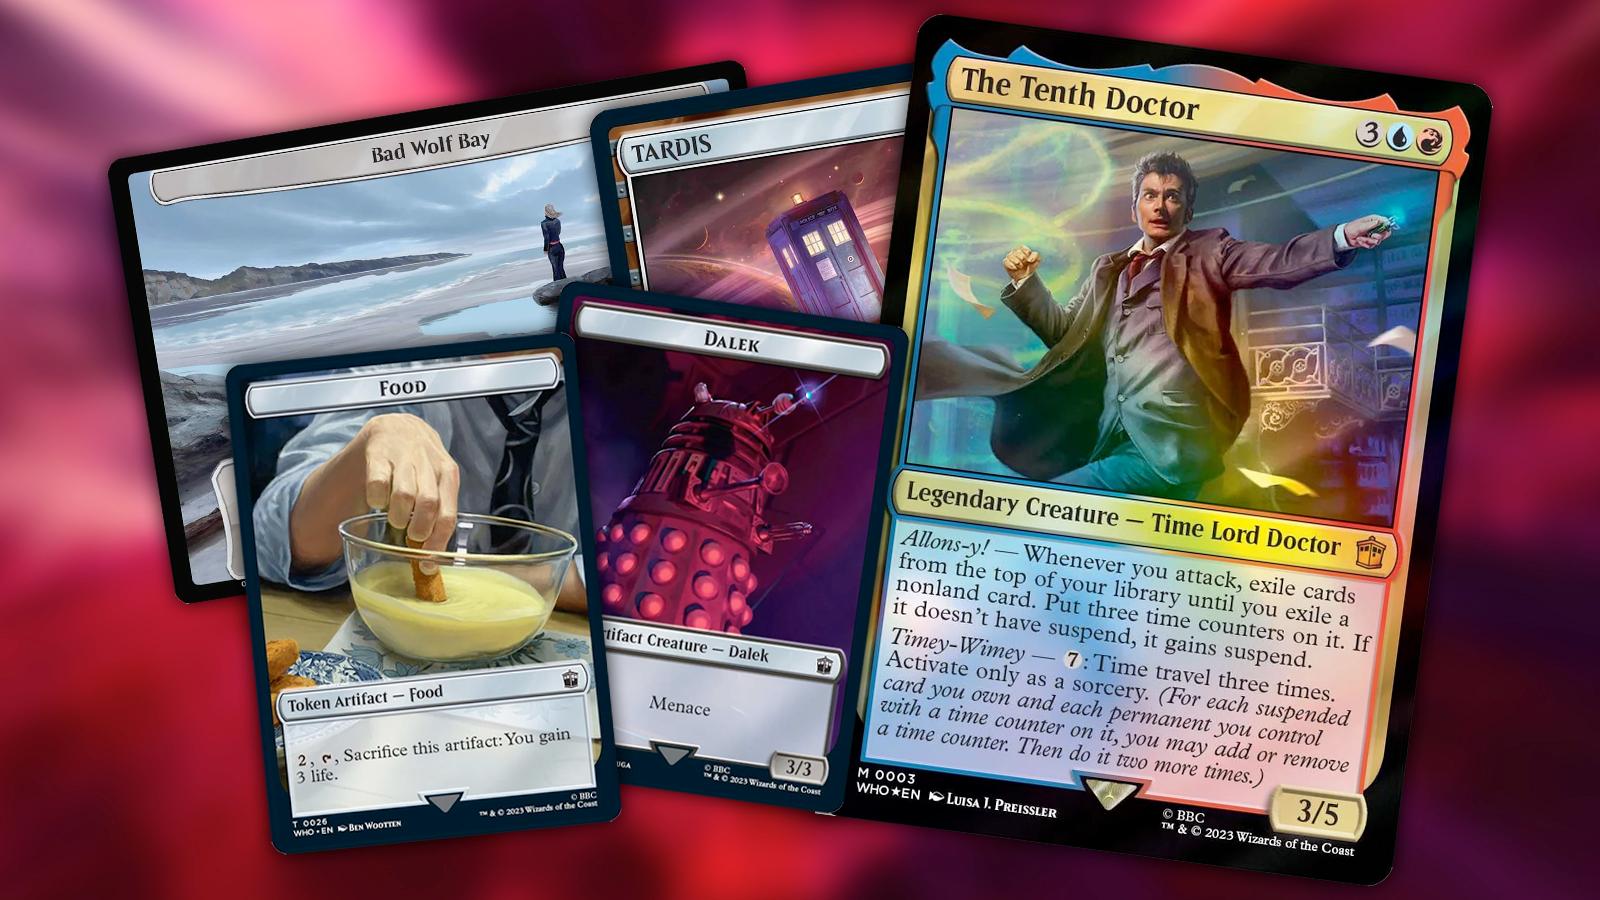 Magic: The Gathering Reveals New Look at Doctor Who Set